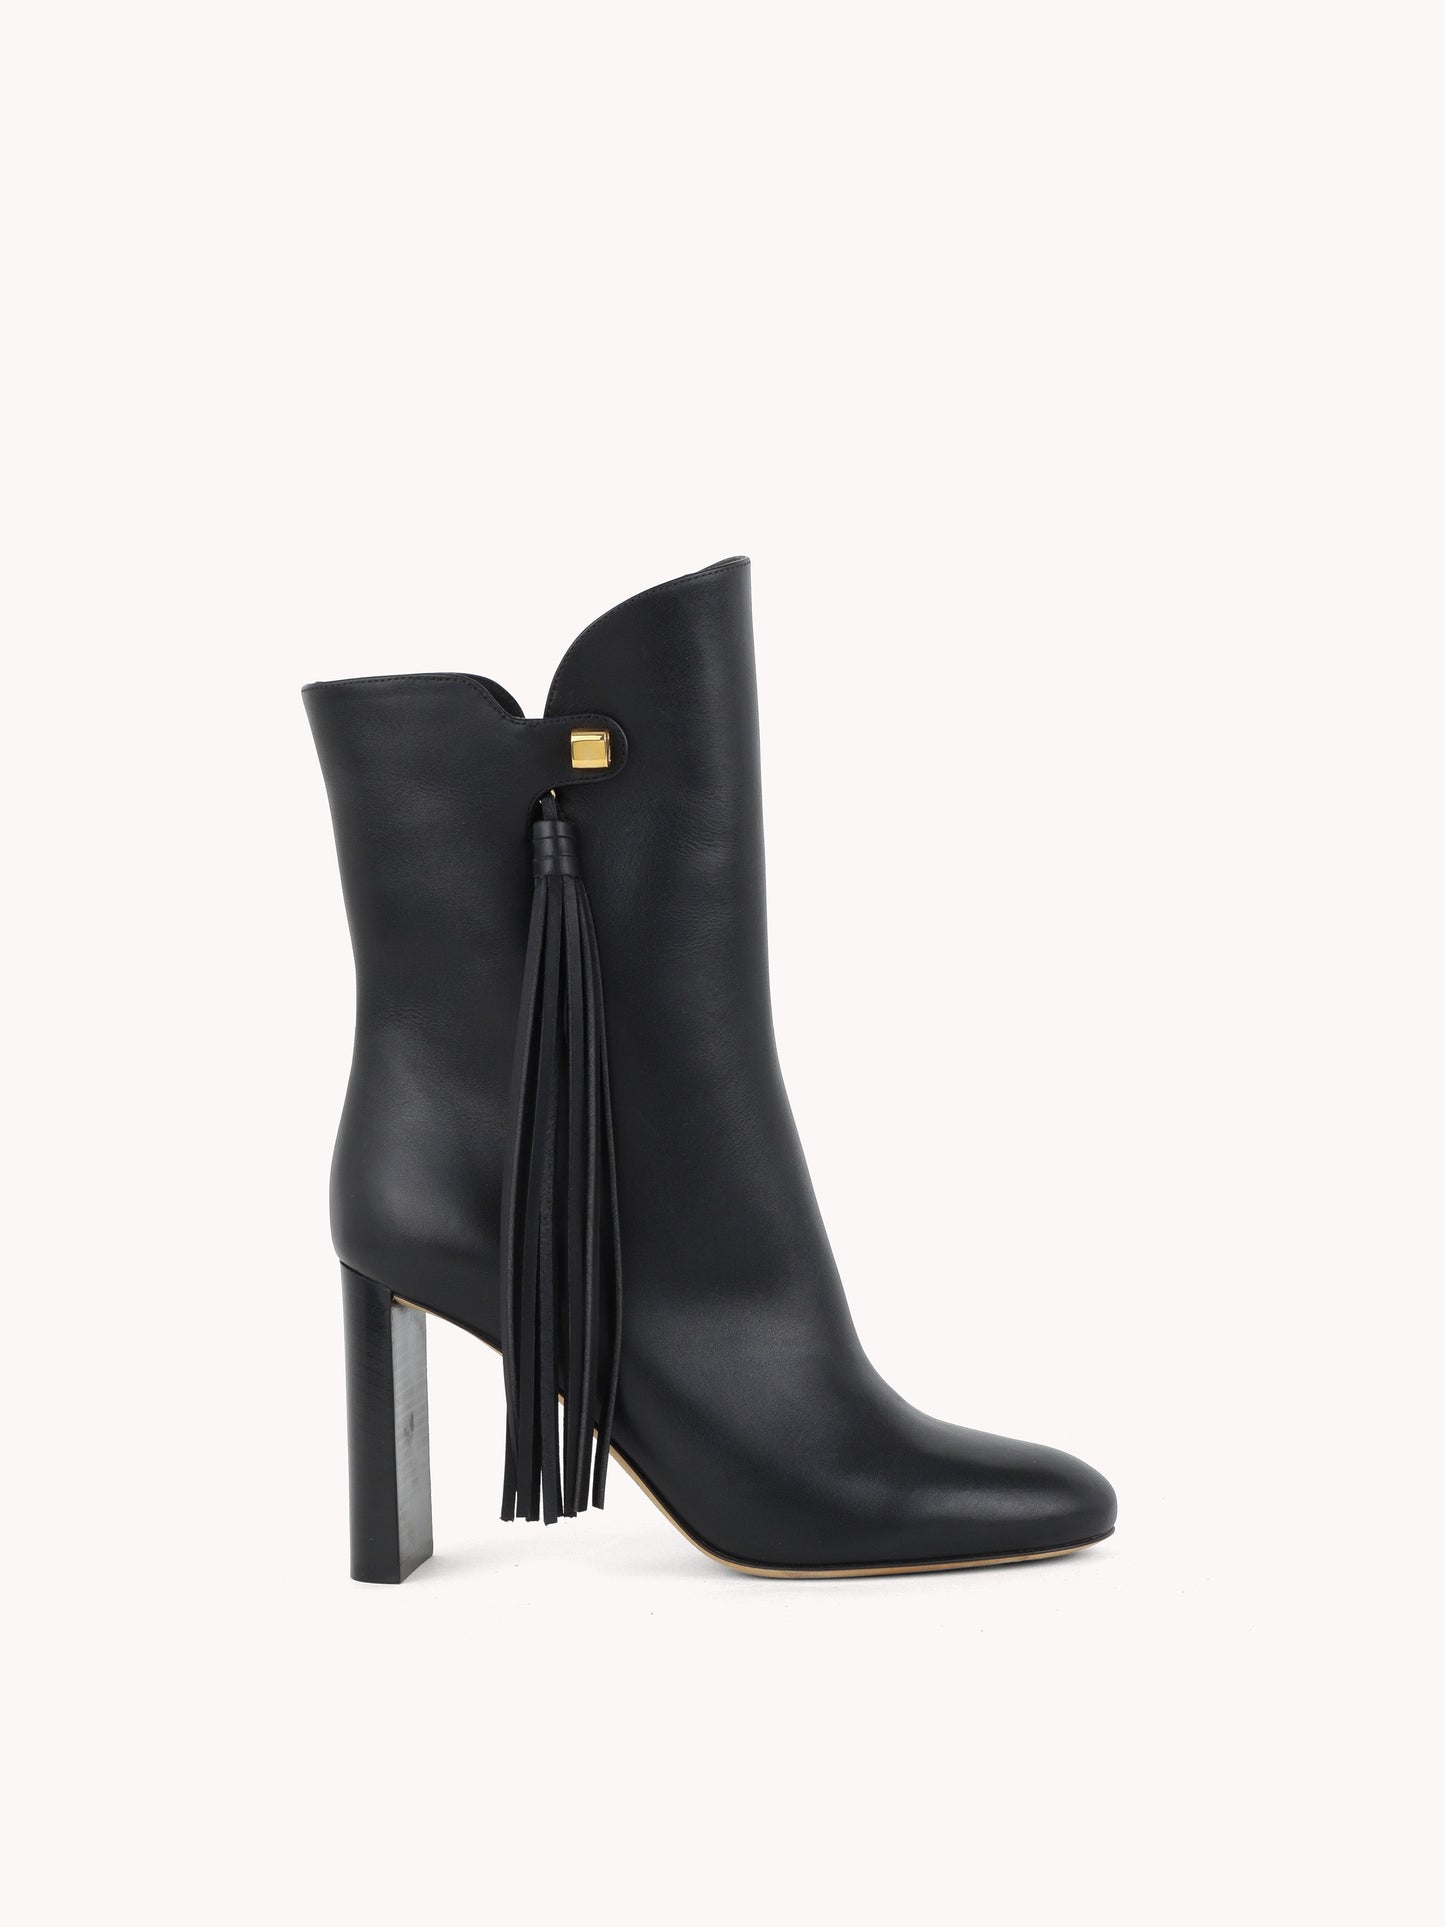 equestrian sophisticated black leather ankle boots skorpios